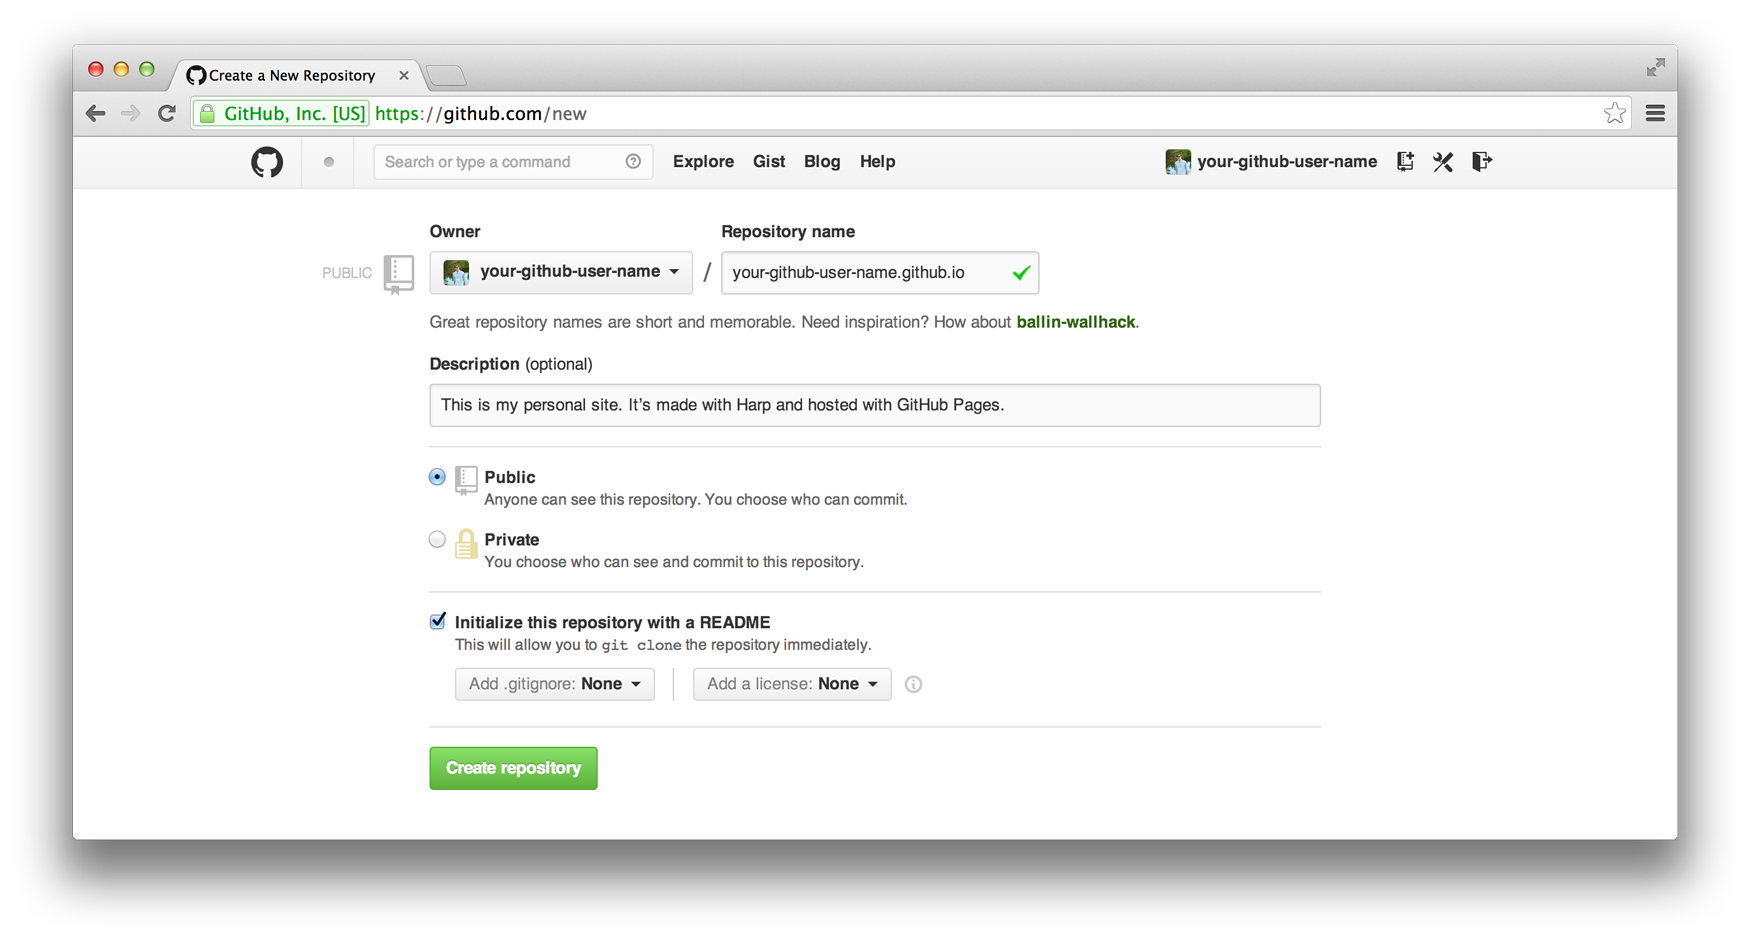 The settings to use for your new repository on GitHub.